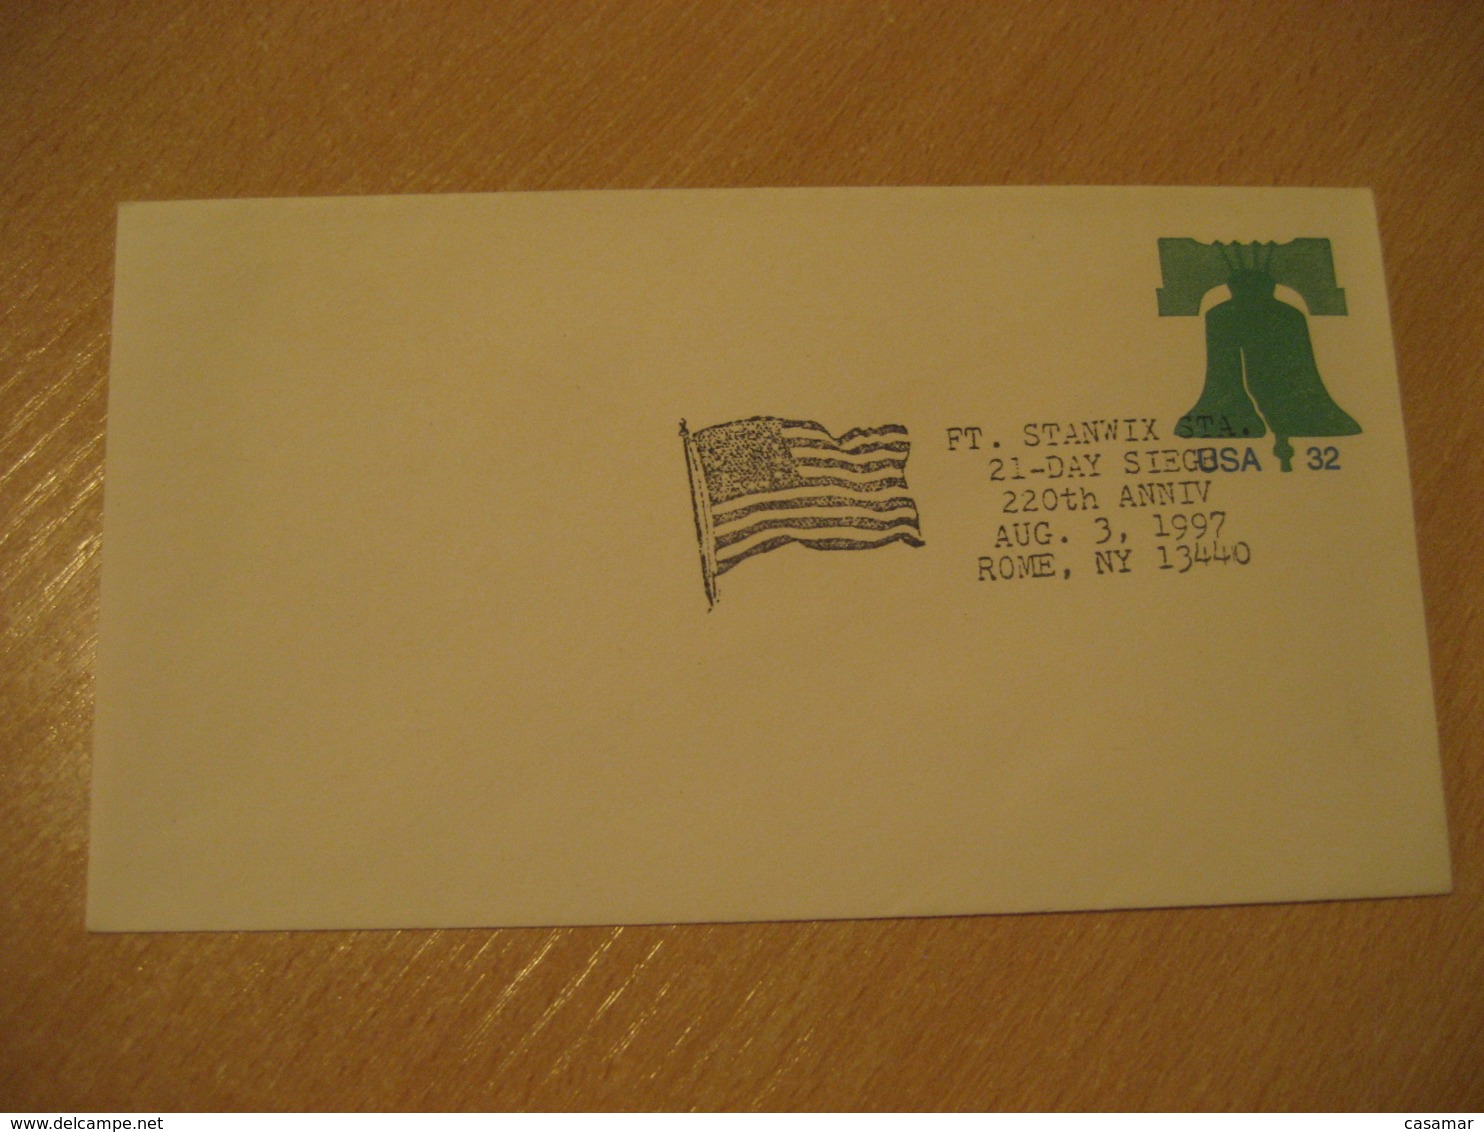 ROME 1997 Ft. Stanwix 21 Day Siege Flag Flags Cancel Cover USA - Briefe